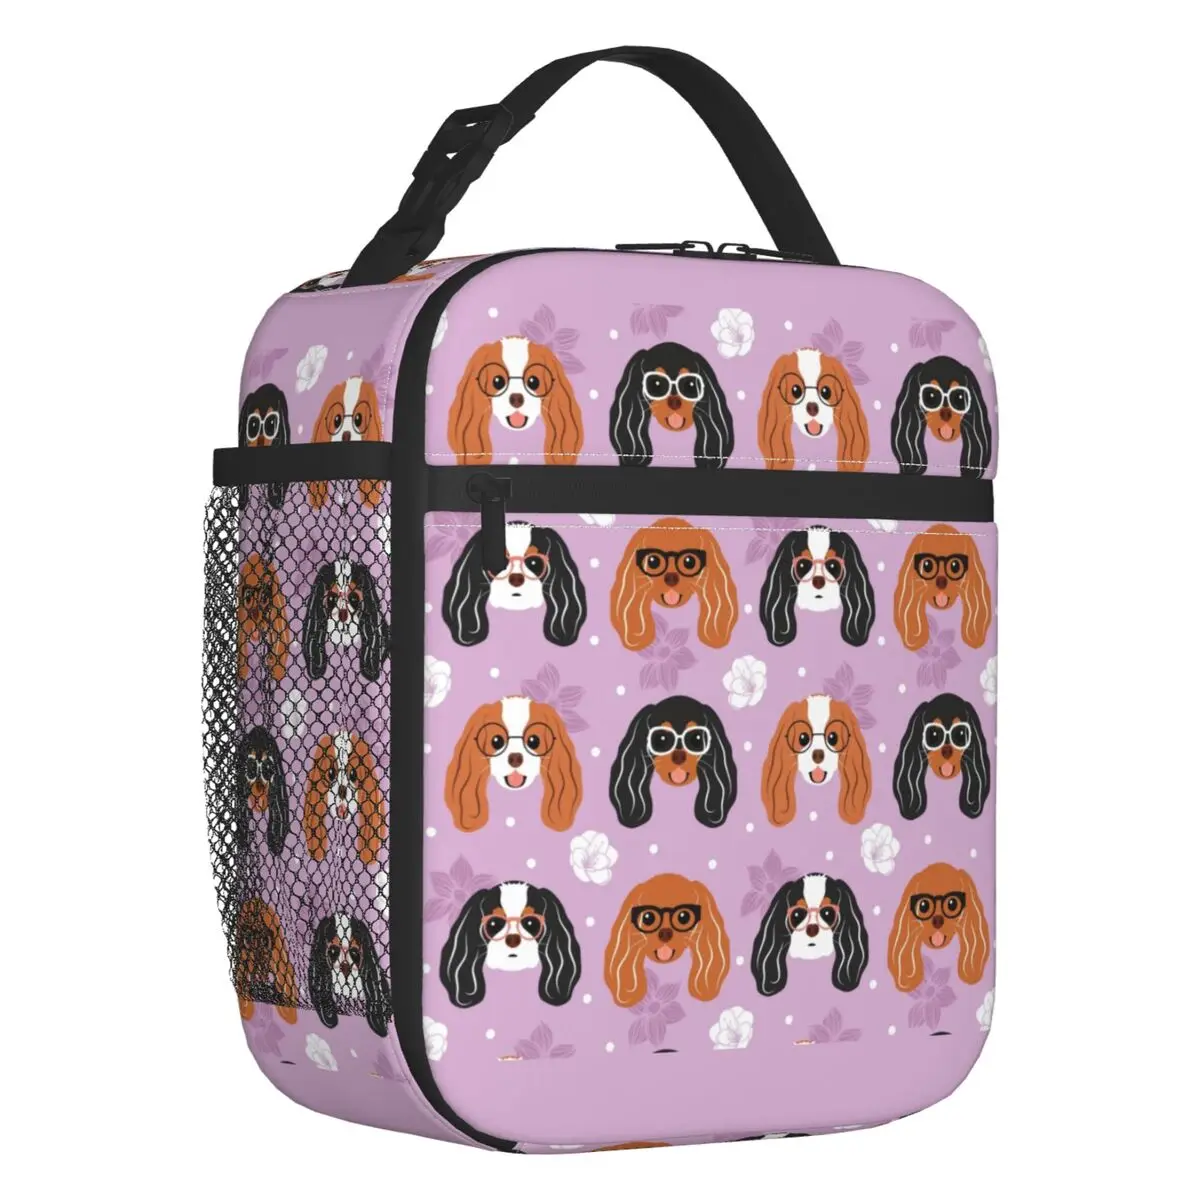 Cavalier King Charles Spaniel With Glasses Resuable Lunch Box Multifunction Dog Thermal Cooler Food Insulated Lunch Bag Kids